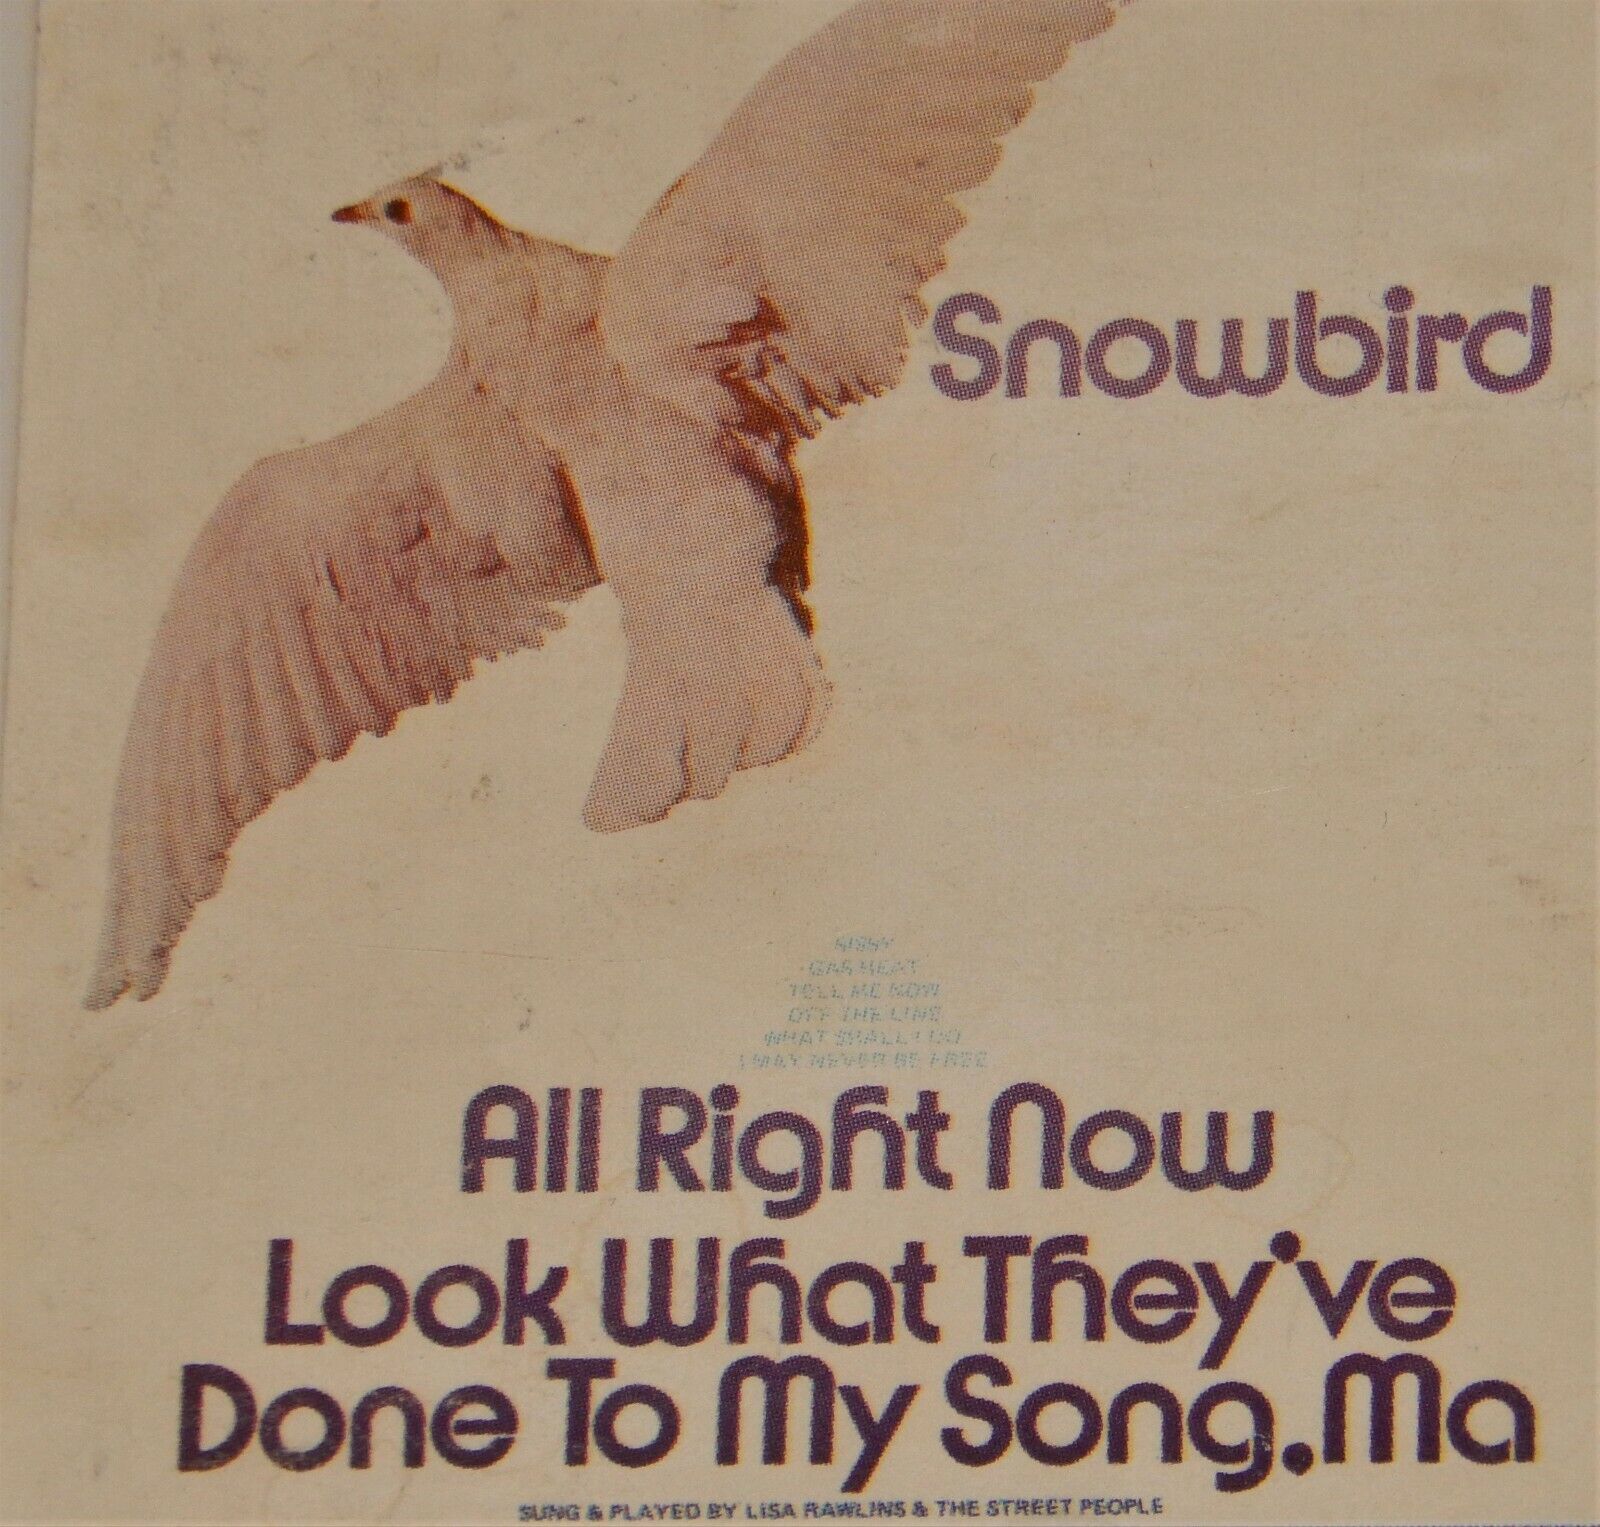 Vintage 8 Track-Tape, LISA RAWLINGS & THE STREET PEOPLE: SNOWBIRD ALL RIGHT NOW